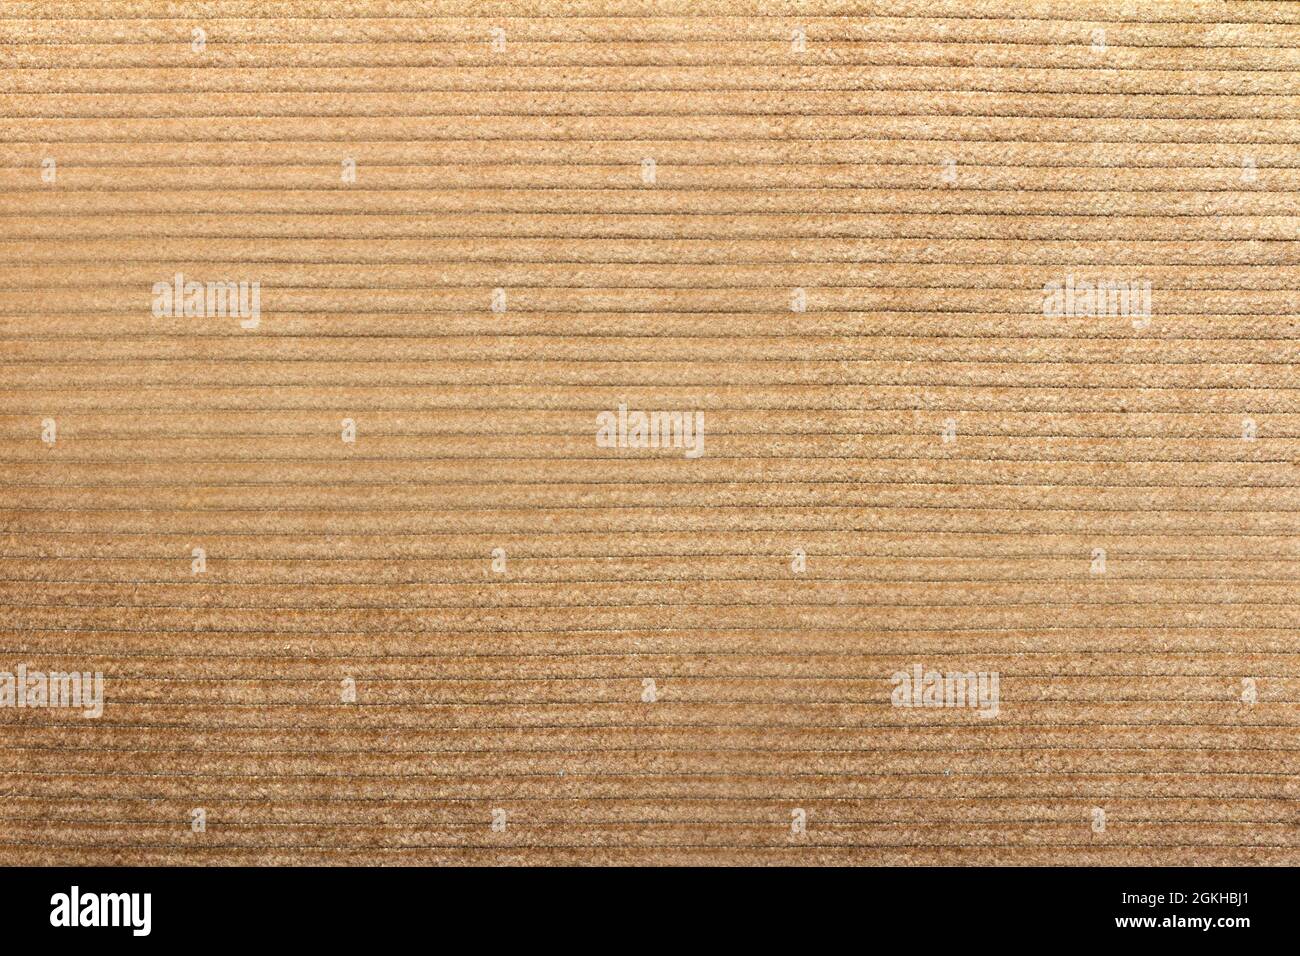 Texture backdrop photo of beige colored corduroy fabric cloth. Stock Photo